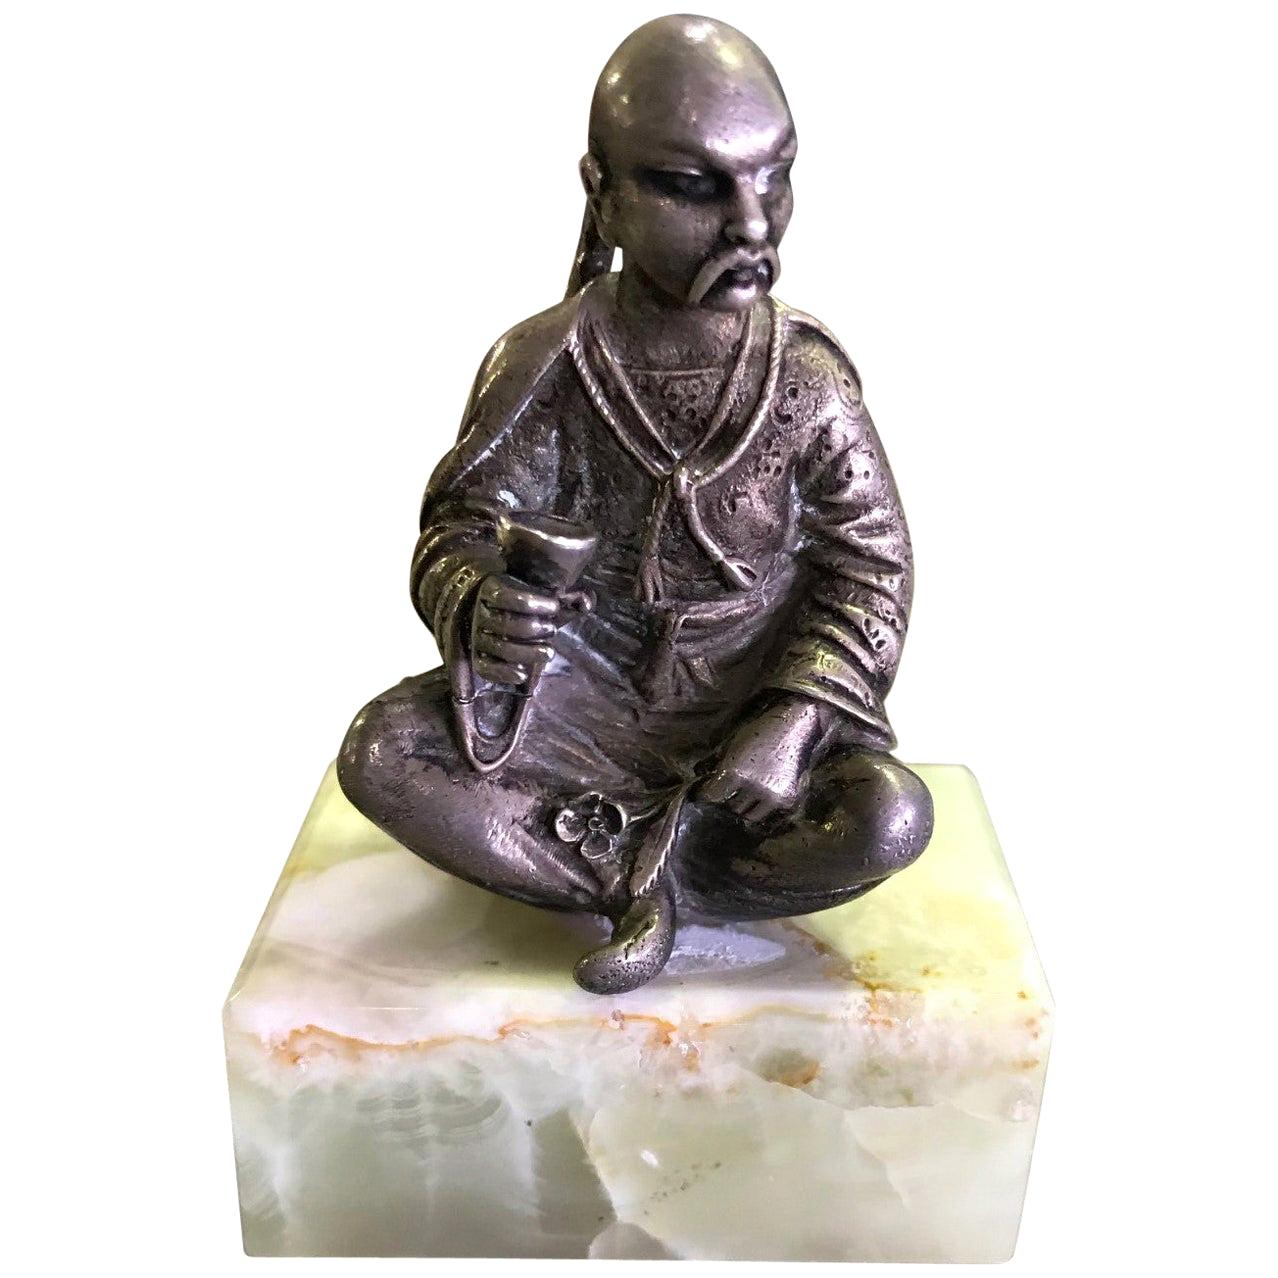 Gorham Sterling Silver Miniature Sculpture of Chinese Man, circa Late 1800s